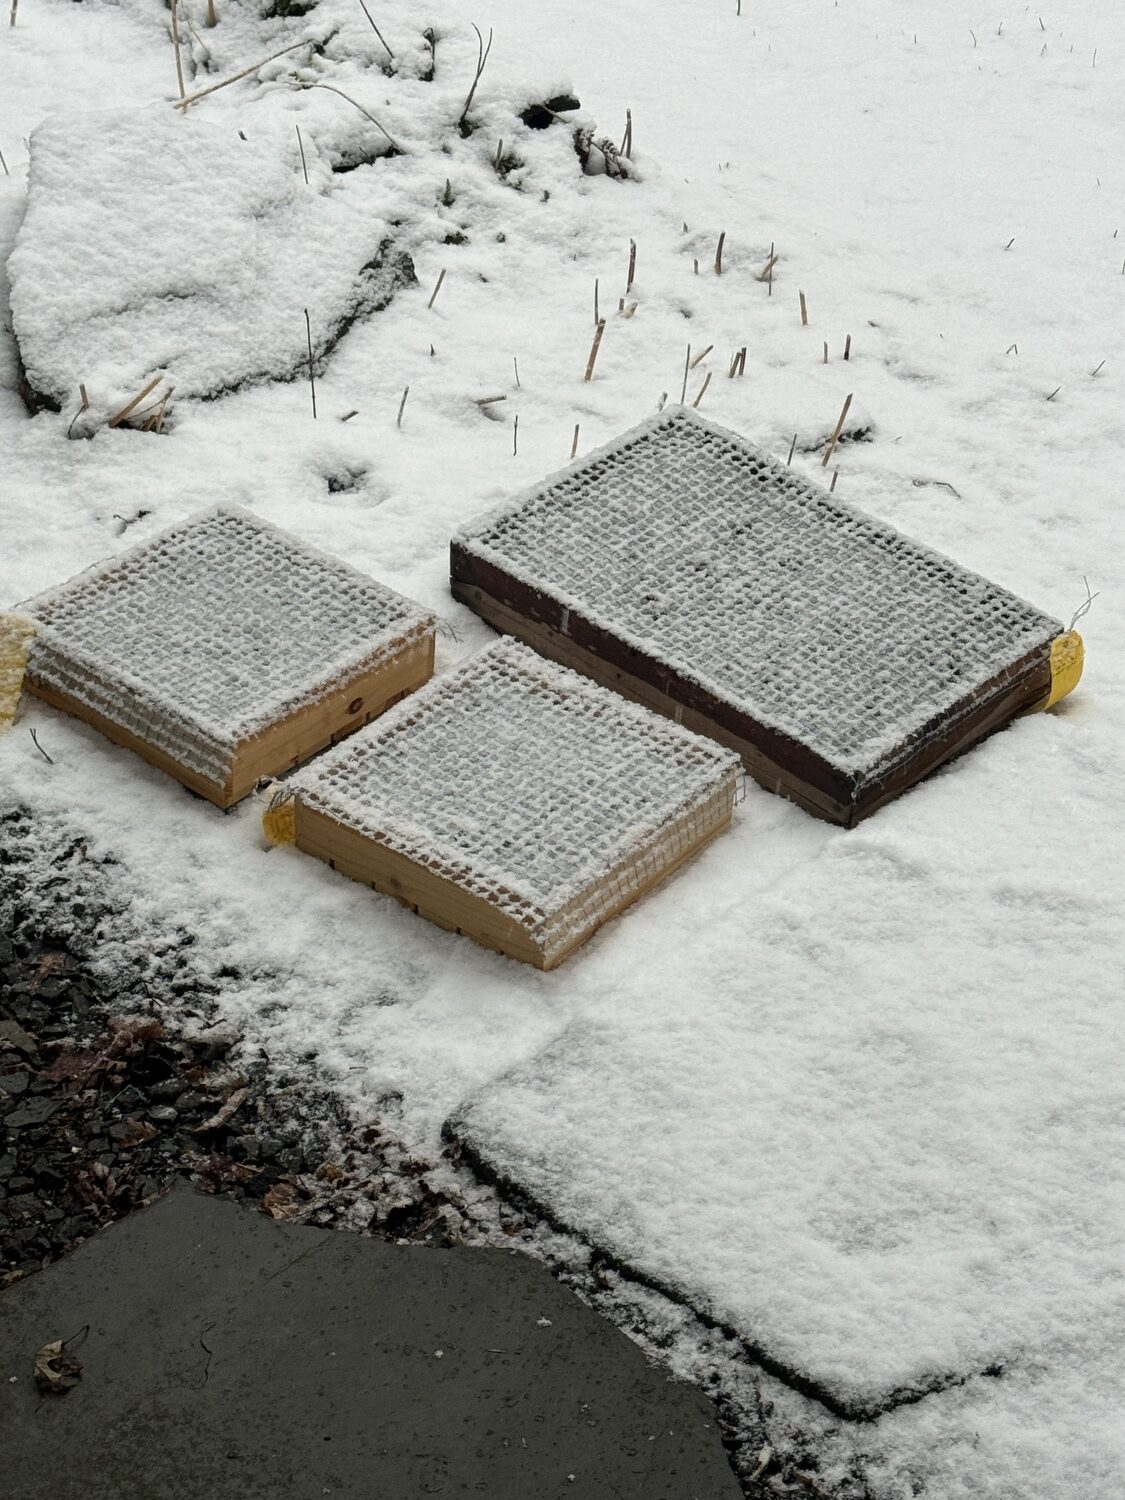 Two half flats of Trollius seed and one full flat of Thermopsis seed. The cold of February and March should be enough for vernalization that will result in germination from May onward.  Yellow plastic tags contain the seed history, and the mesh (stapled to the wooden flats) keeps curious mice and birds from feeding on seeds and sprouts.
ANDREW MESSINGER